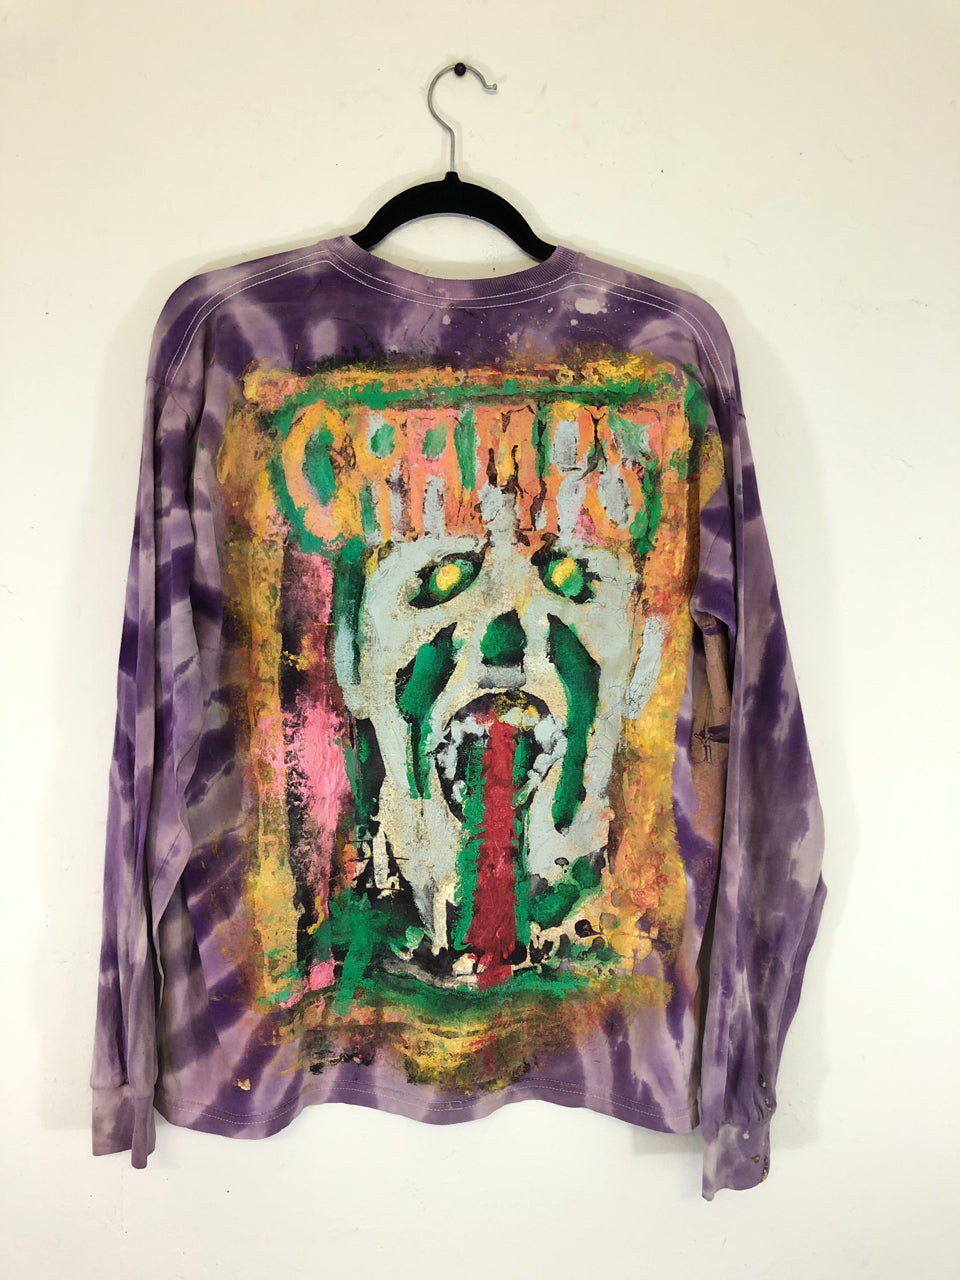 The Cramps Hand Painted Long-Sleeveless Tie Dyed T-Shirt